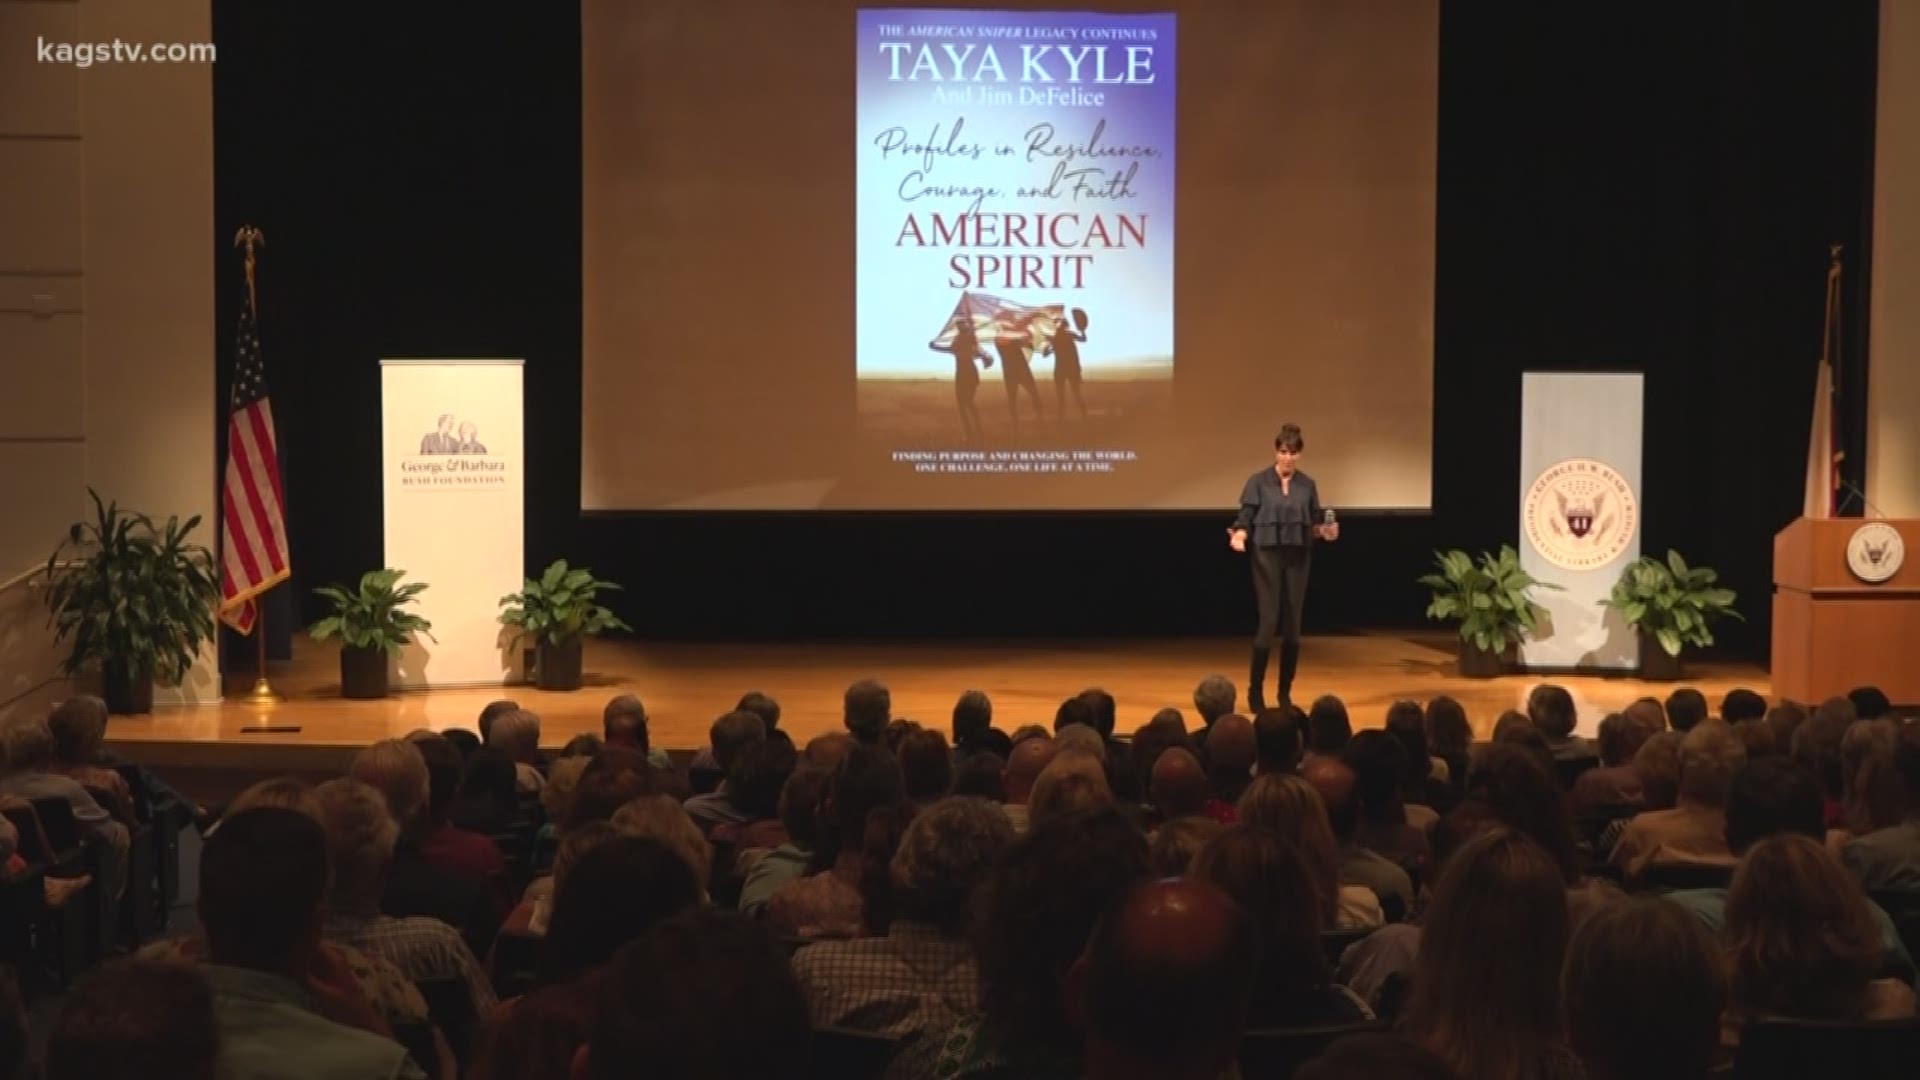 The bestselling author and wife of the late Chris Kyle spoke to an audience at the Annenberg Presidential Center.